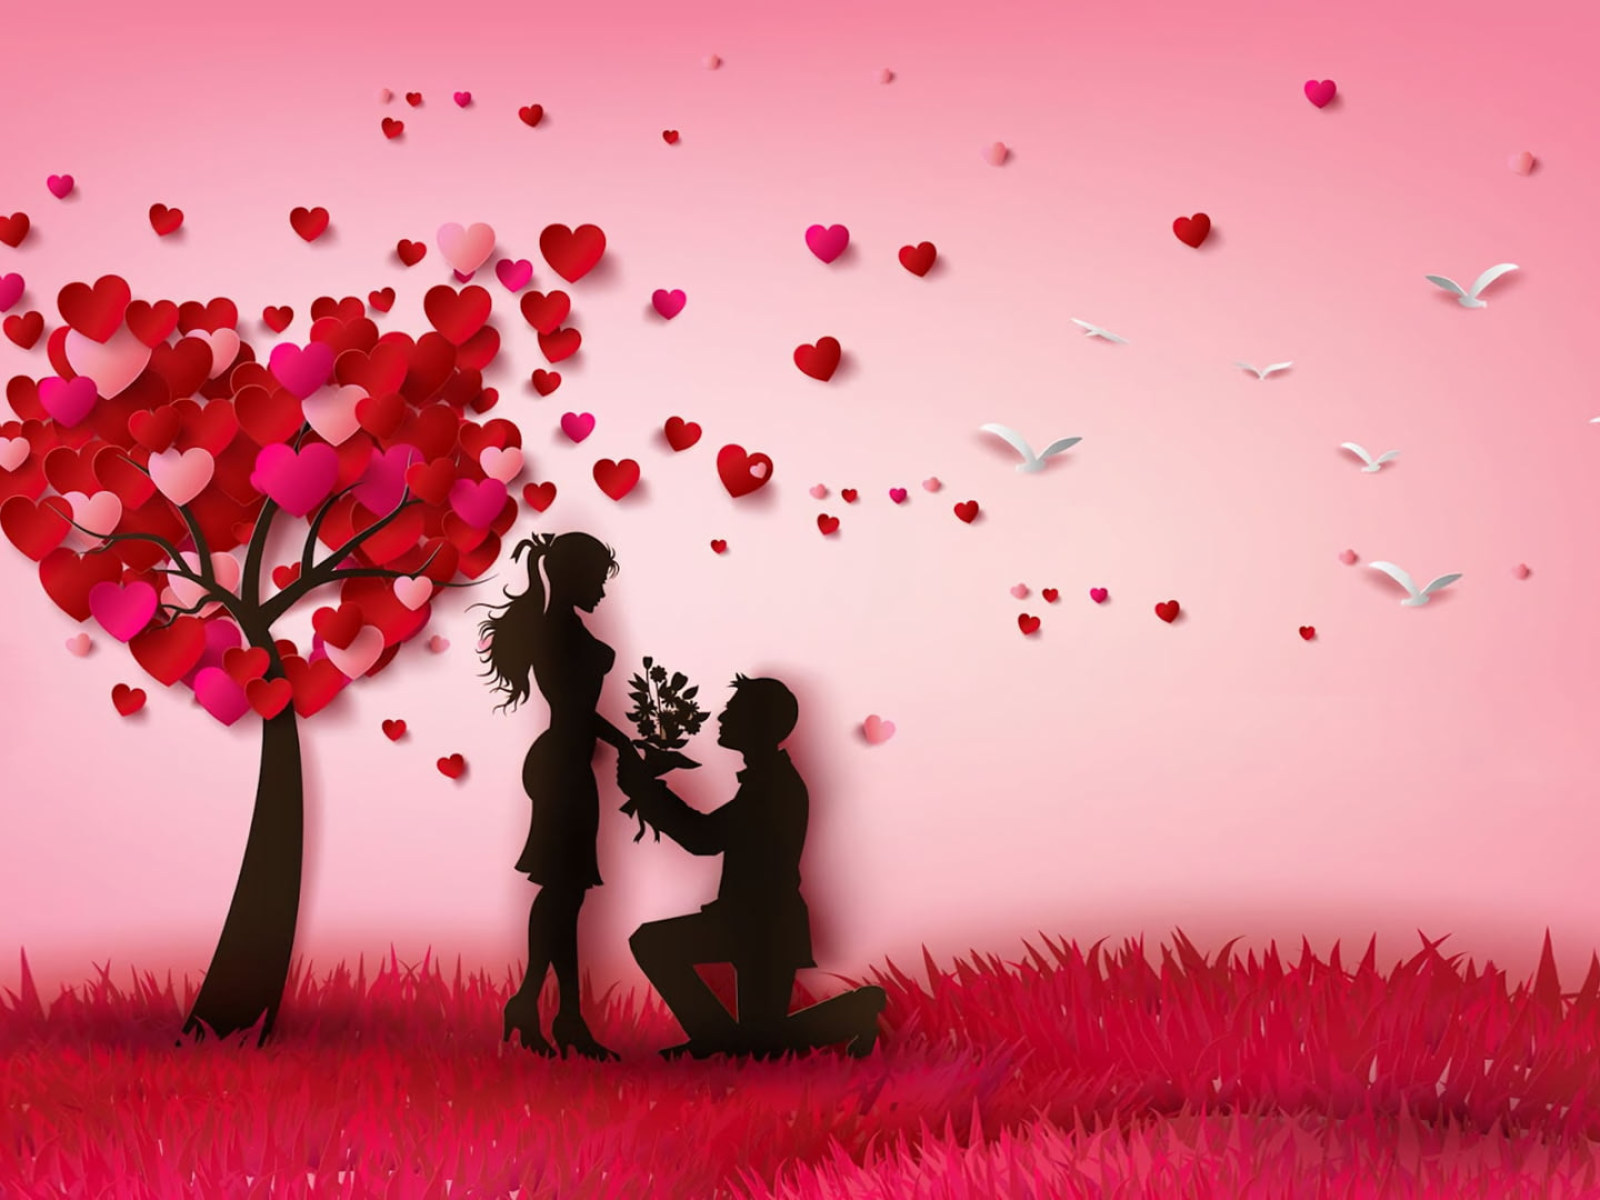 Tree For Love Wallpapers